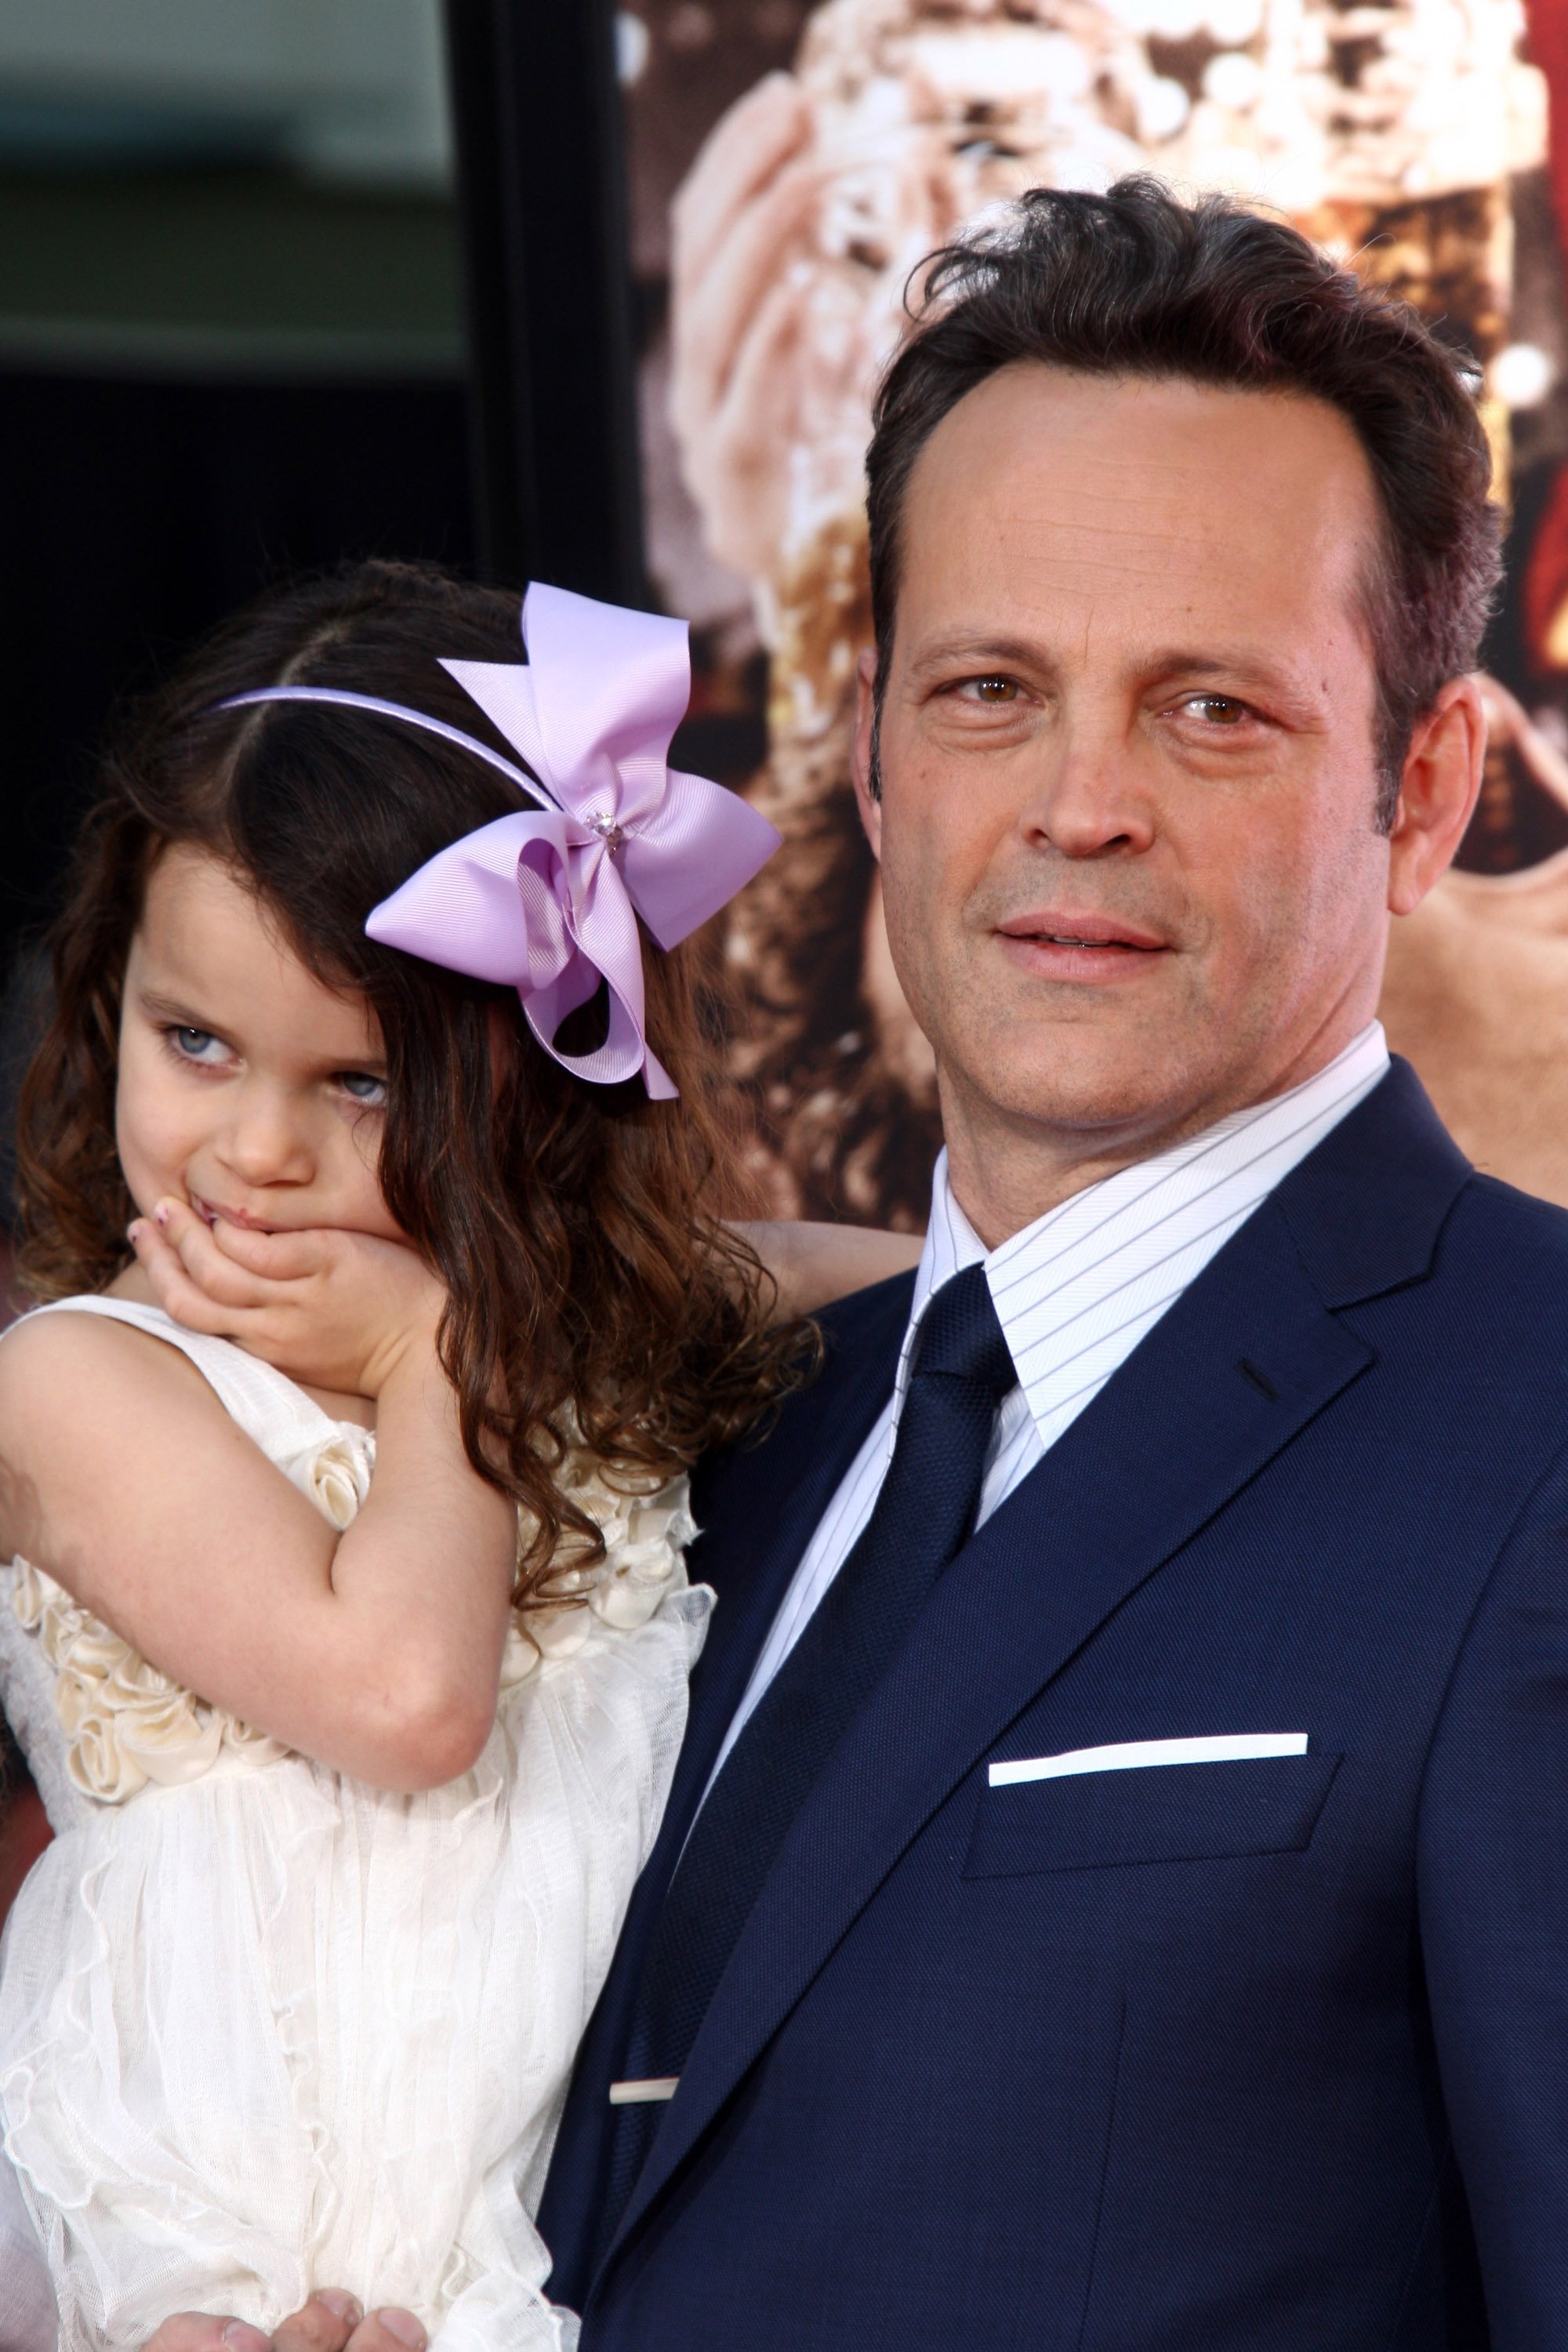 Vince Vaughn and his daughter, Locklyn Kyla Vaughn at the hand and footprint ceremony honoring Vince Vaughn at the TCL Chinese Theatre IMAX in 2015 in Hollywood. | Source: Getty Images